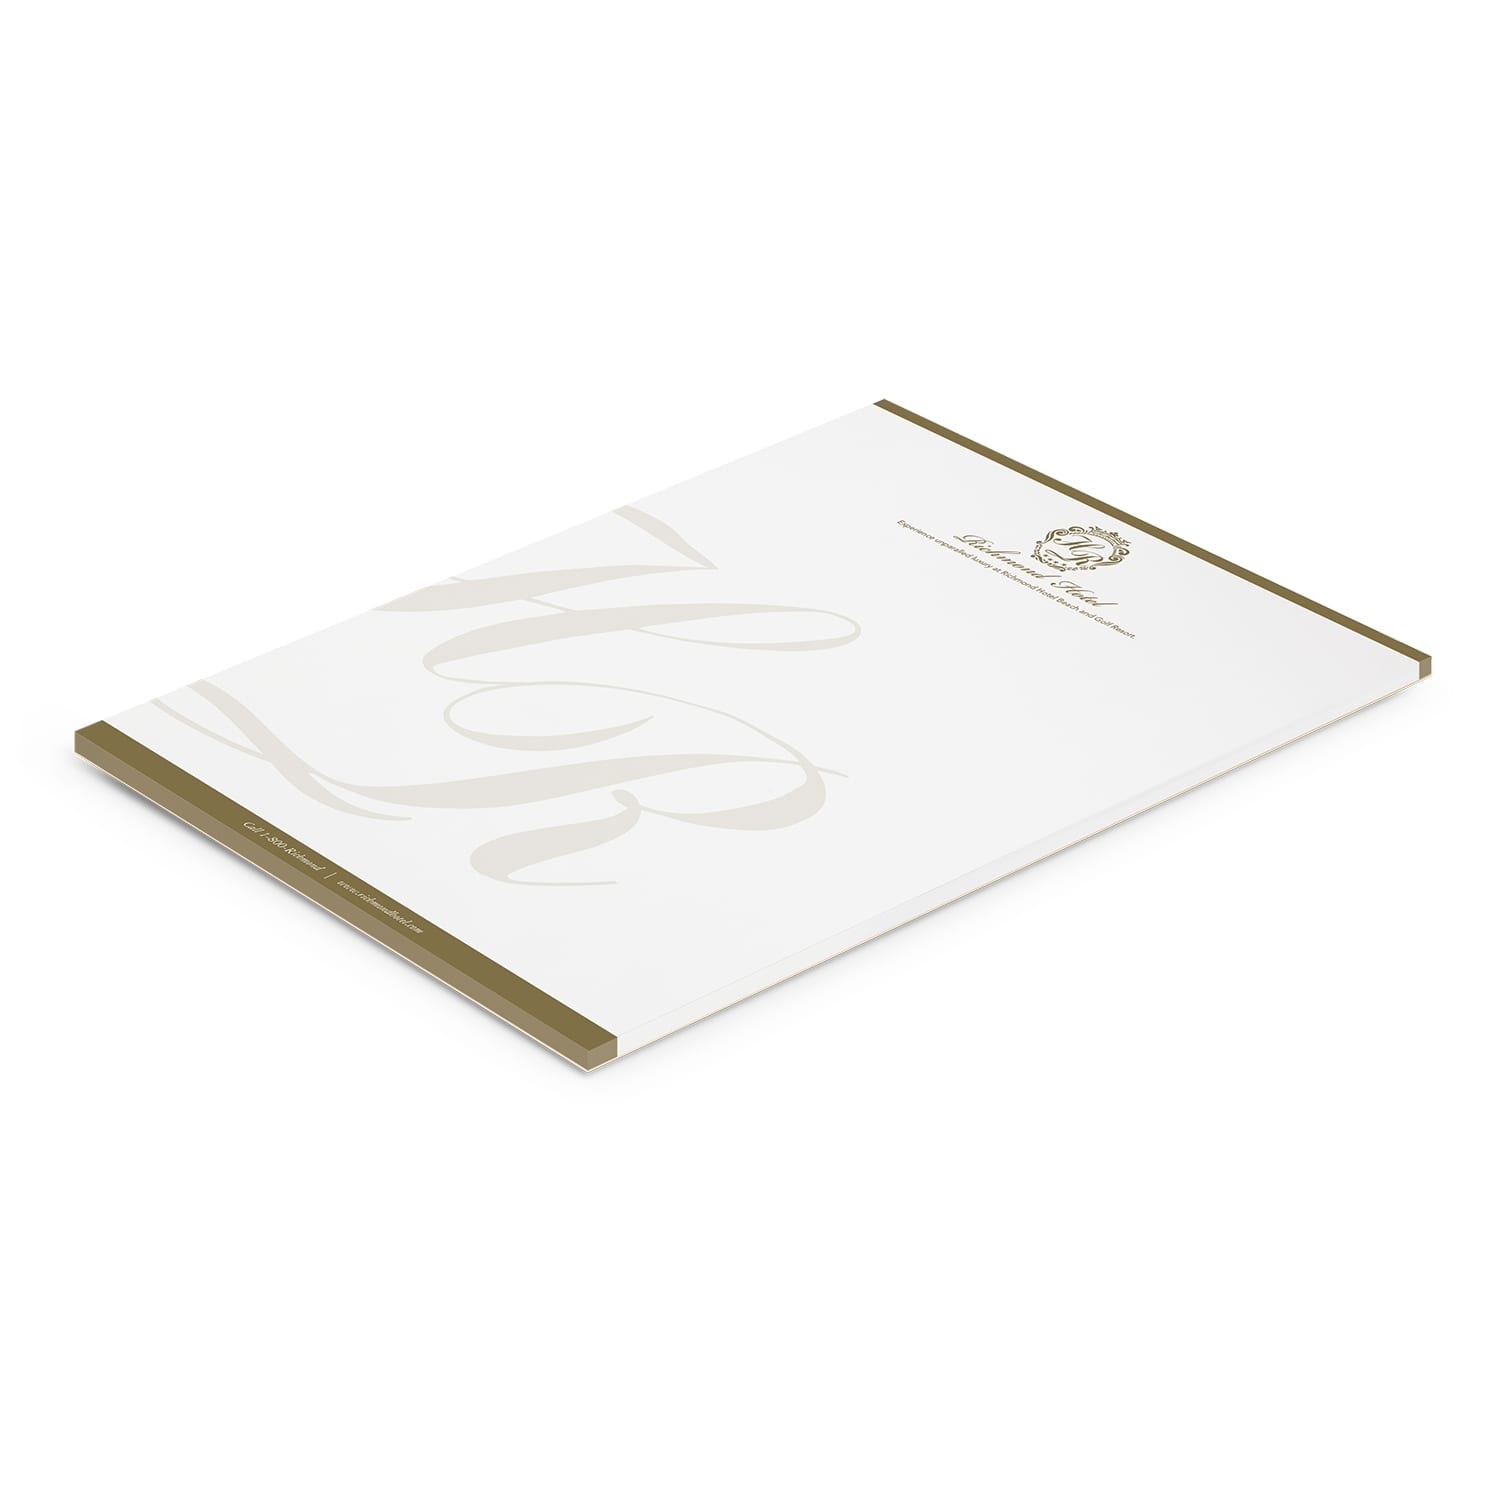 Mailable Items A4 Note Pad – 50 Leaves -